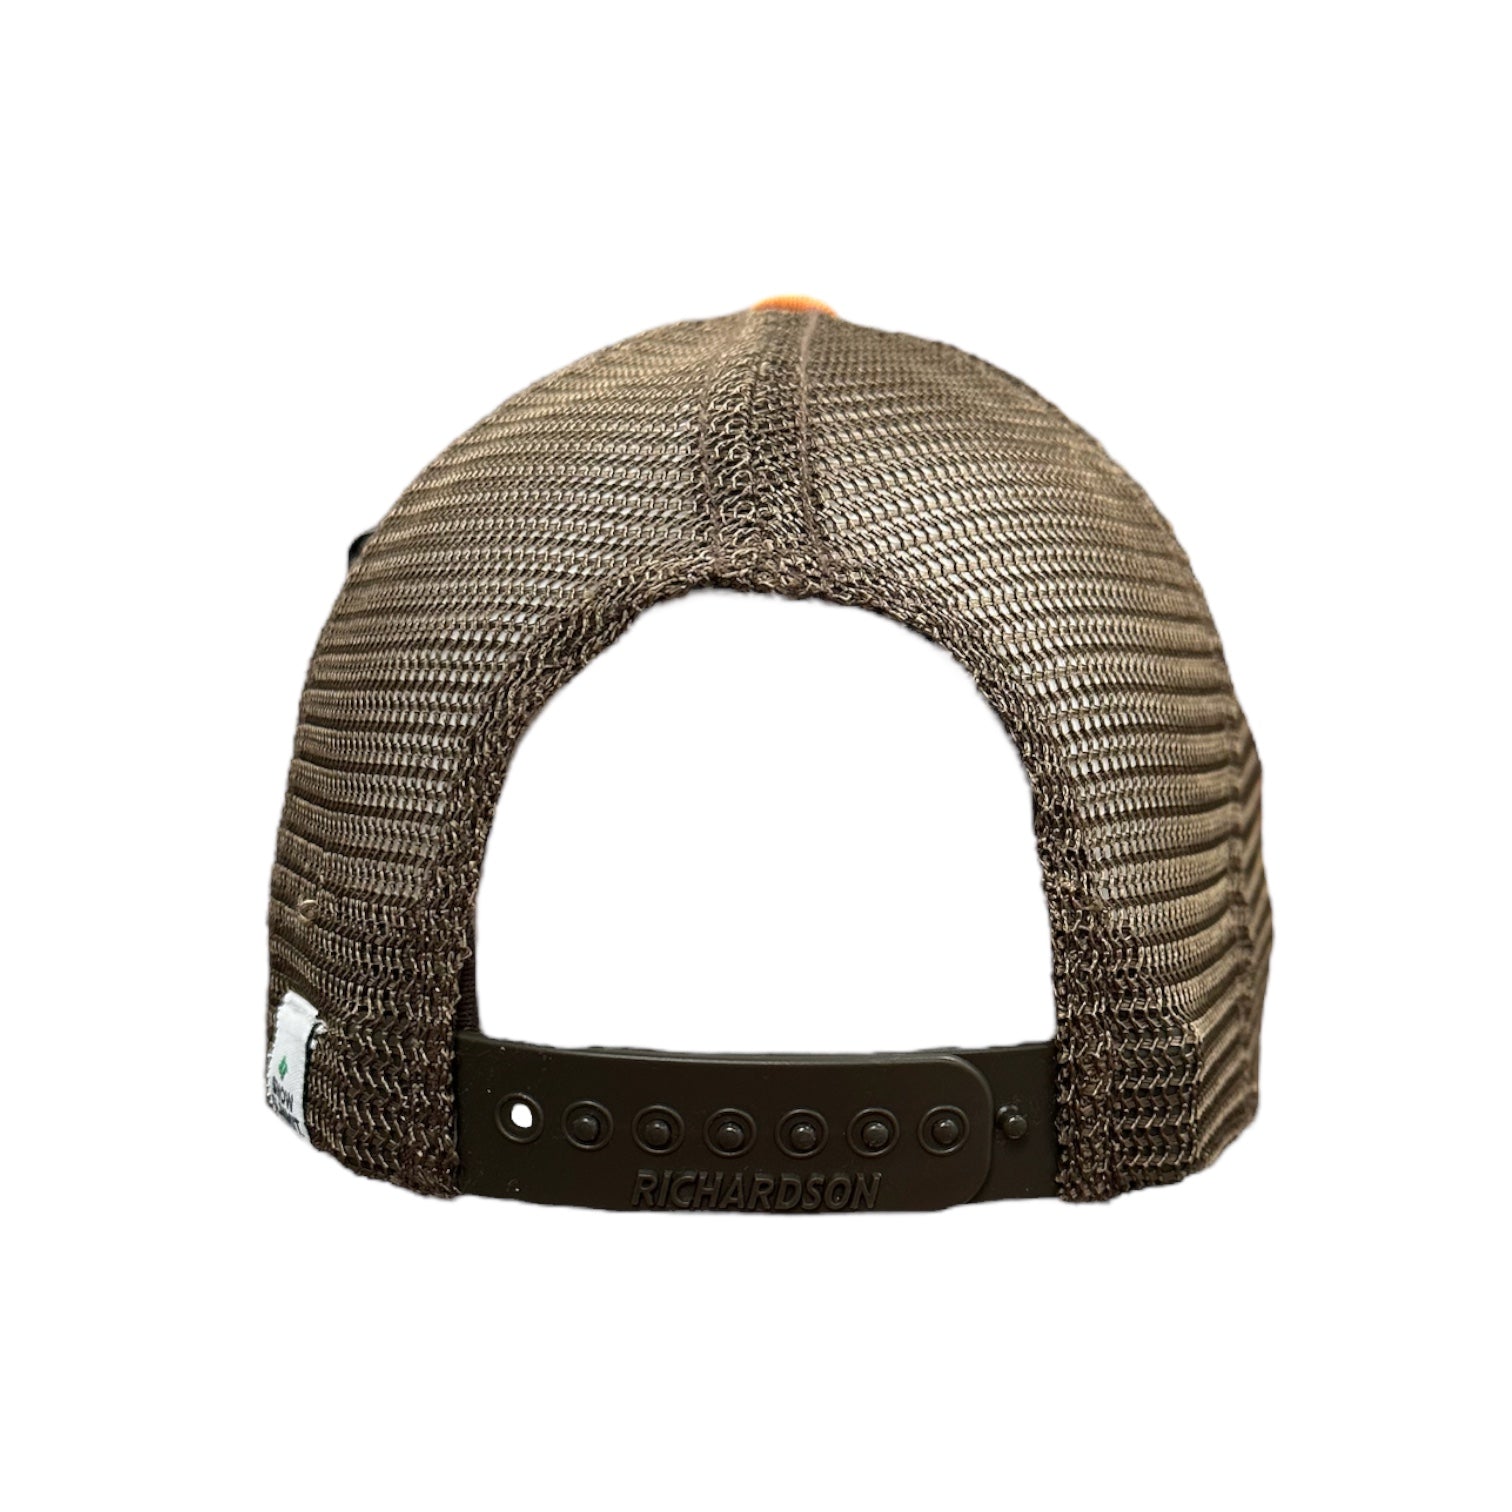 Back of hat with brown mesh and snapback